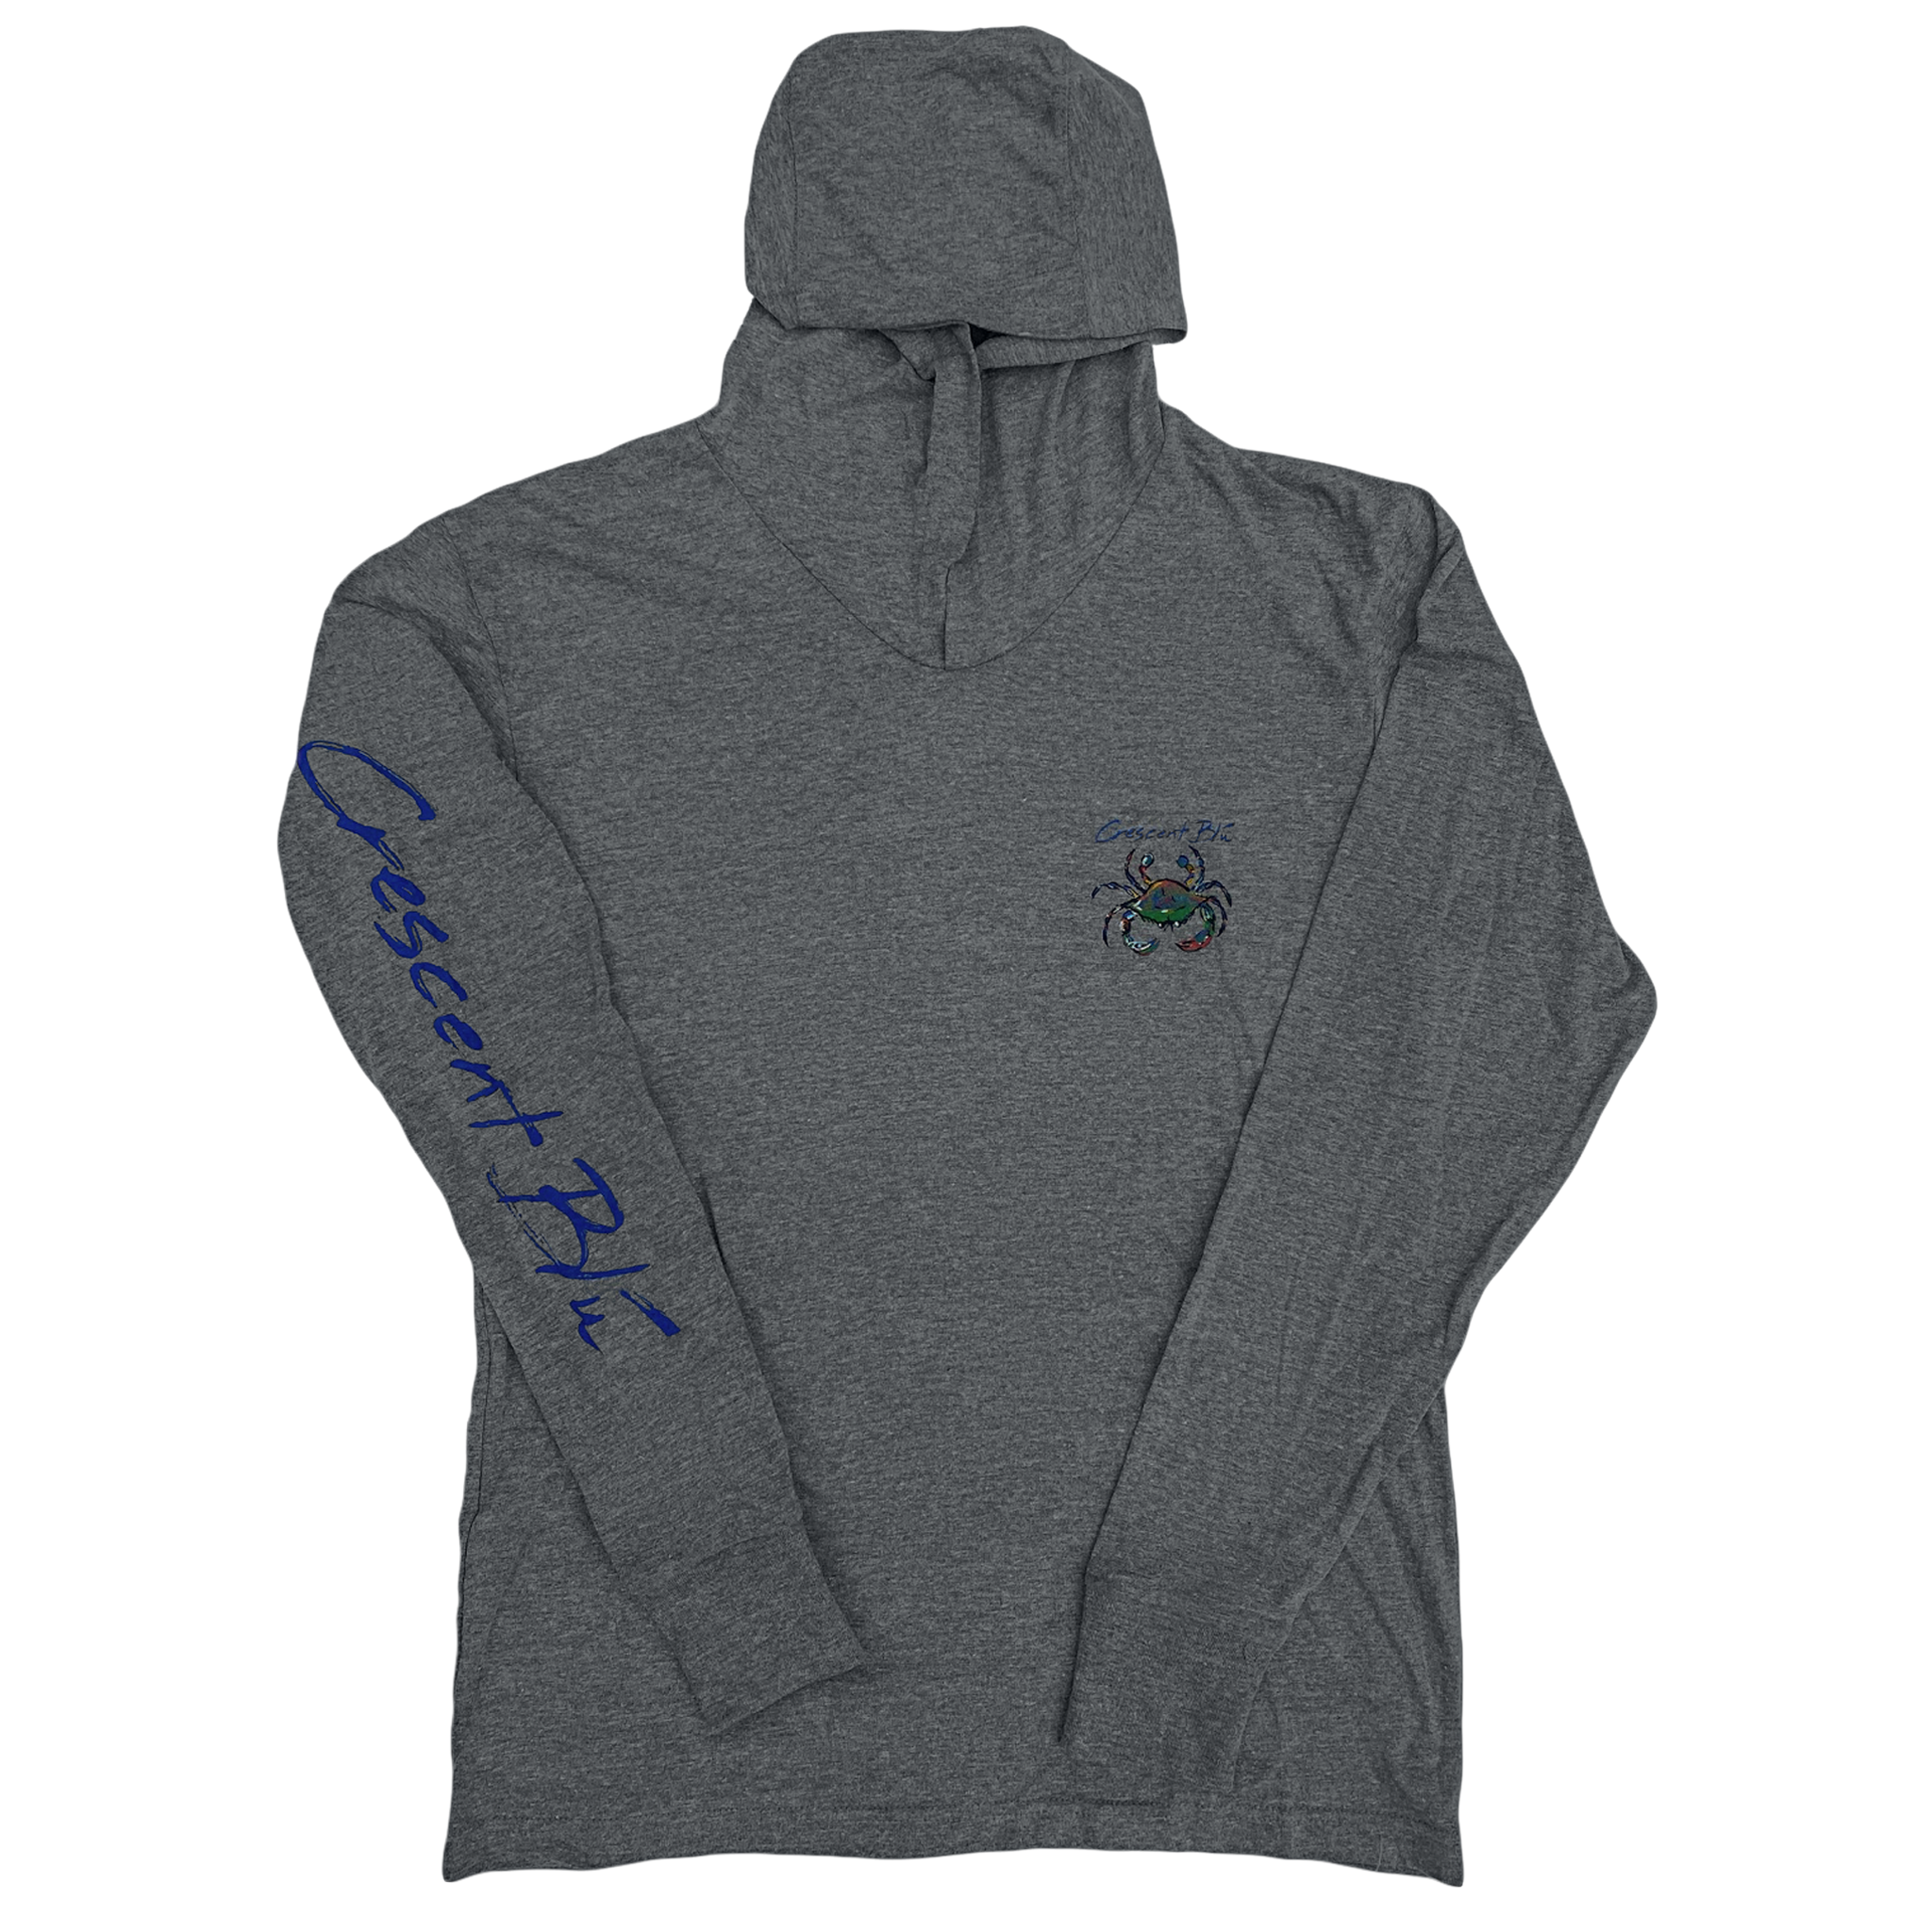 Gray hooded shirt with Crescent Blu down the right sleeve and a colorful blue crab on the left chest.